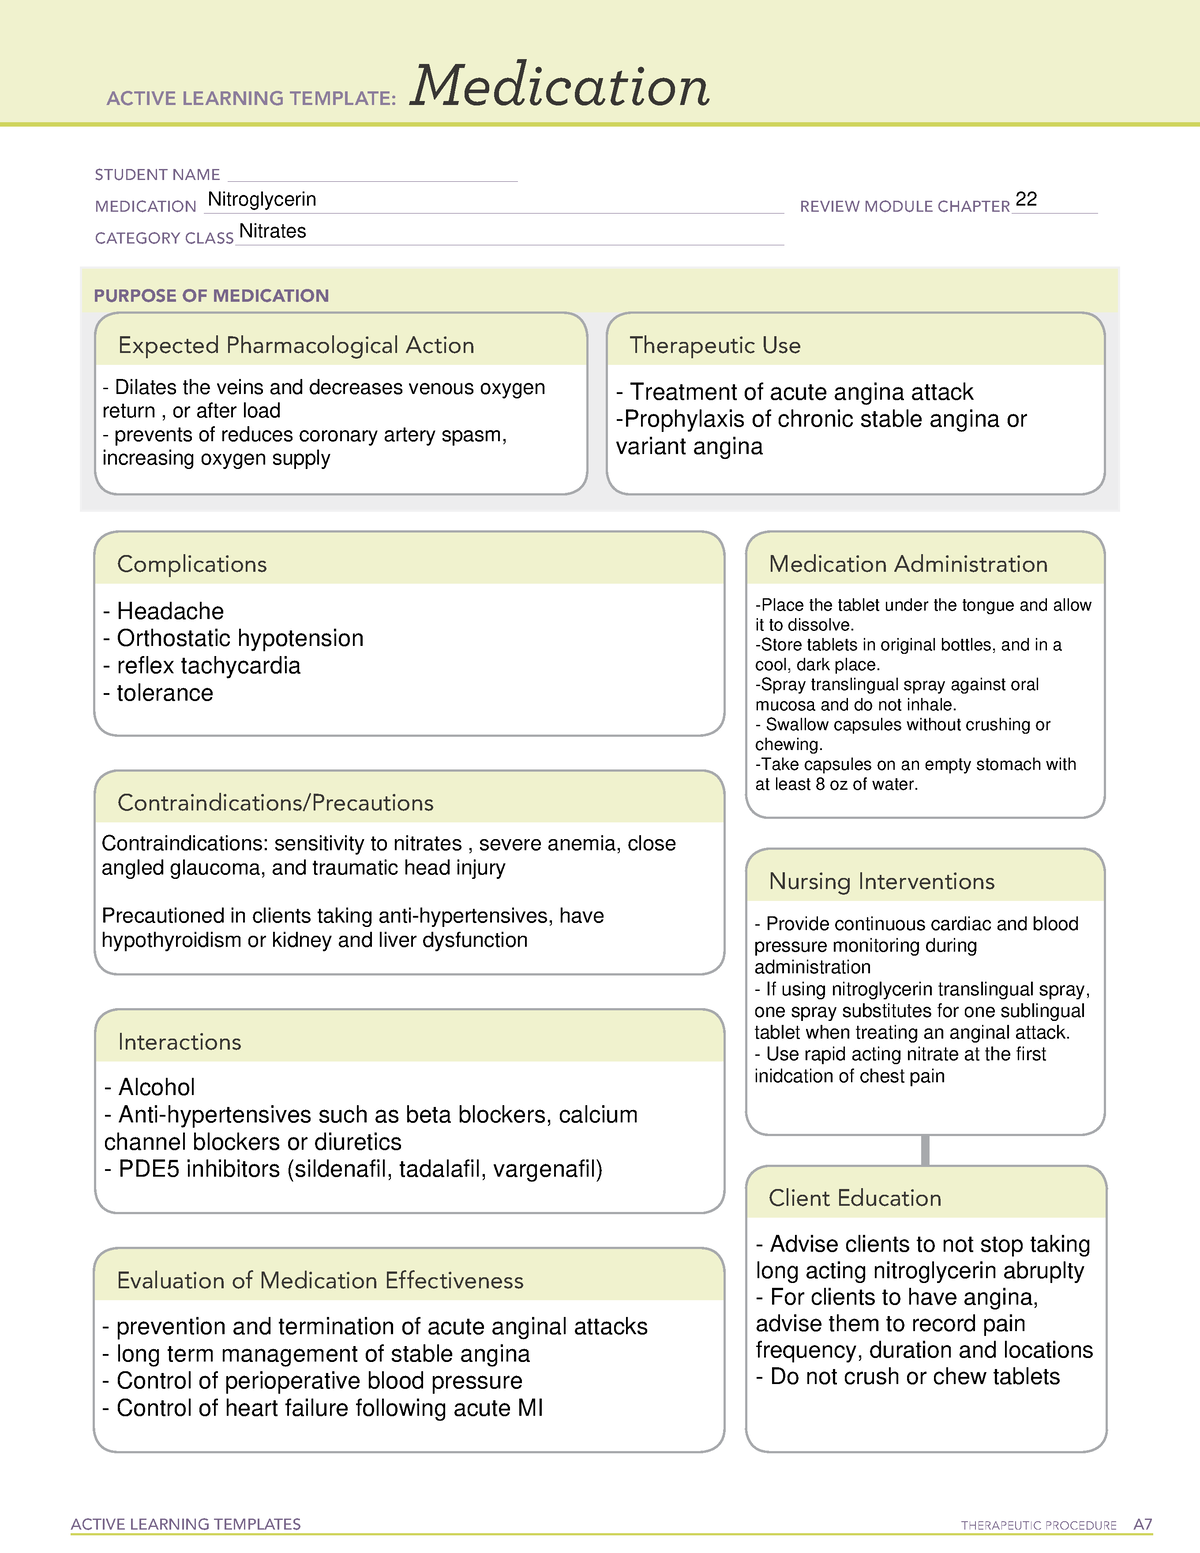 Nitroglycerin Drug template ACTIVE LEARNING TEMPLATES THERAPEUTIC